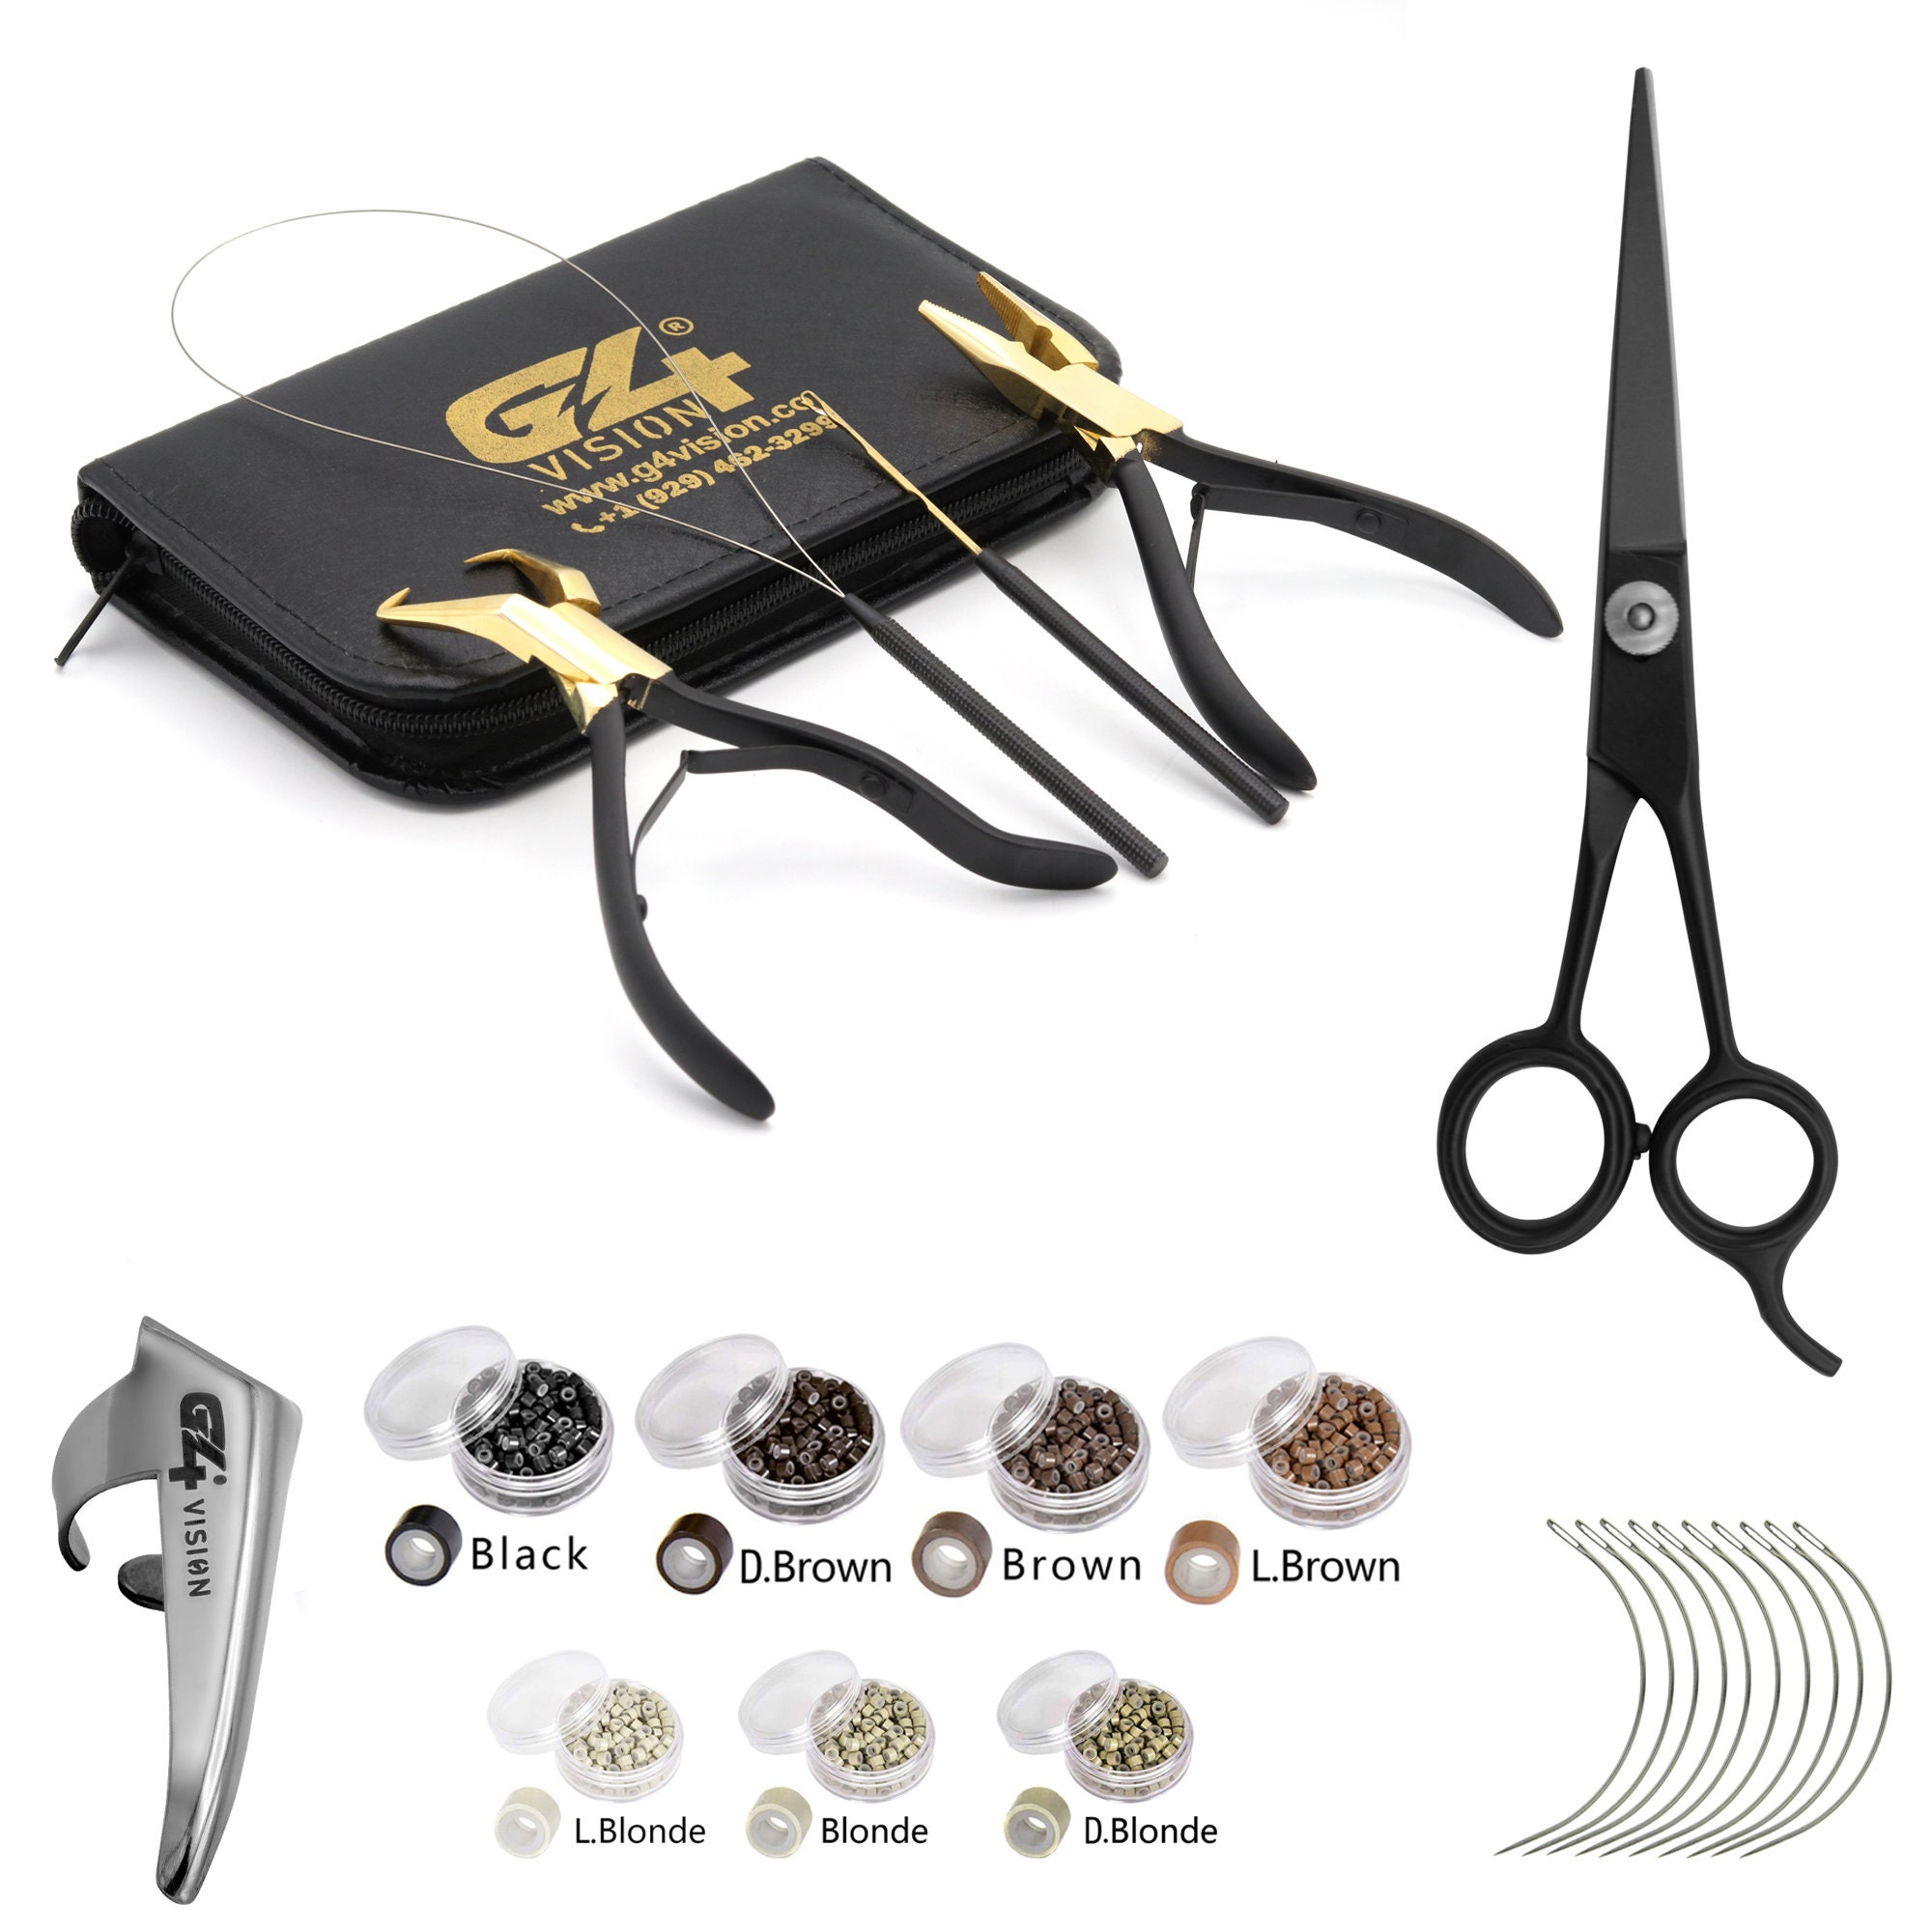 G4 VISION Professional Hair Extension Beading Tool Kit Remove